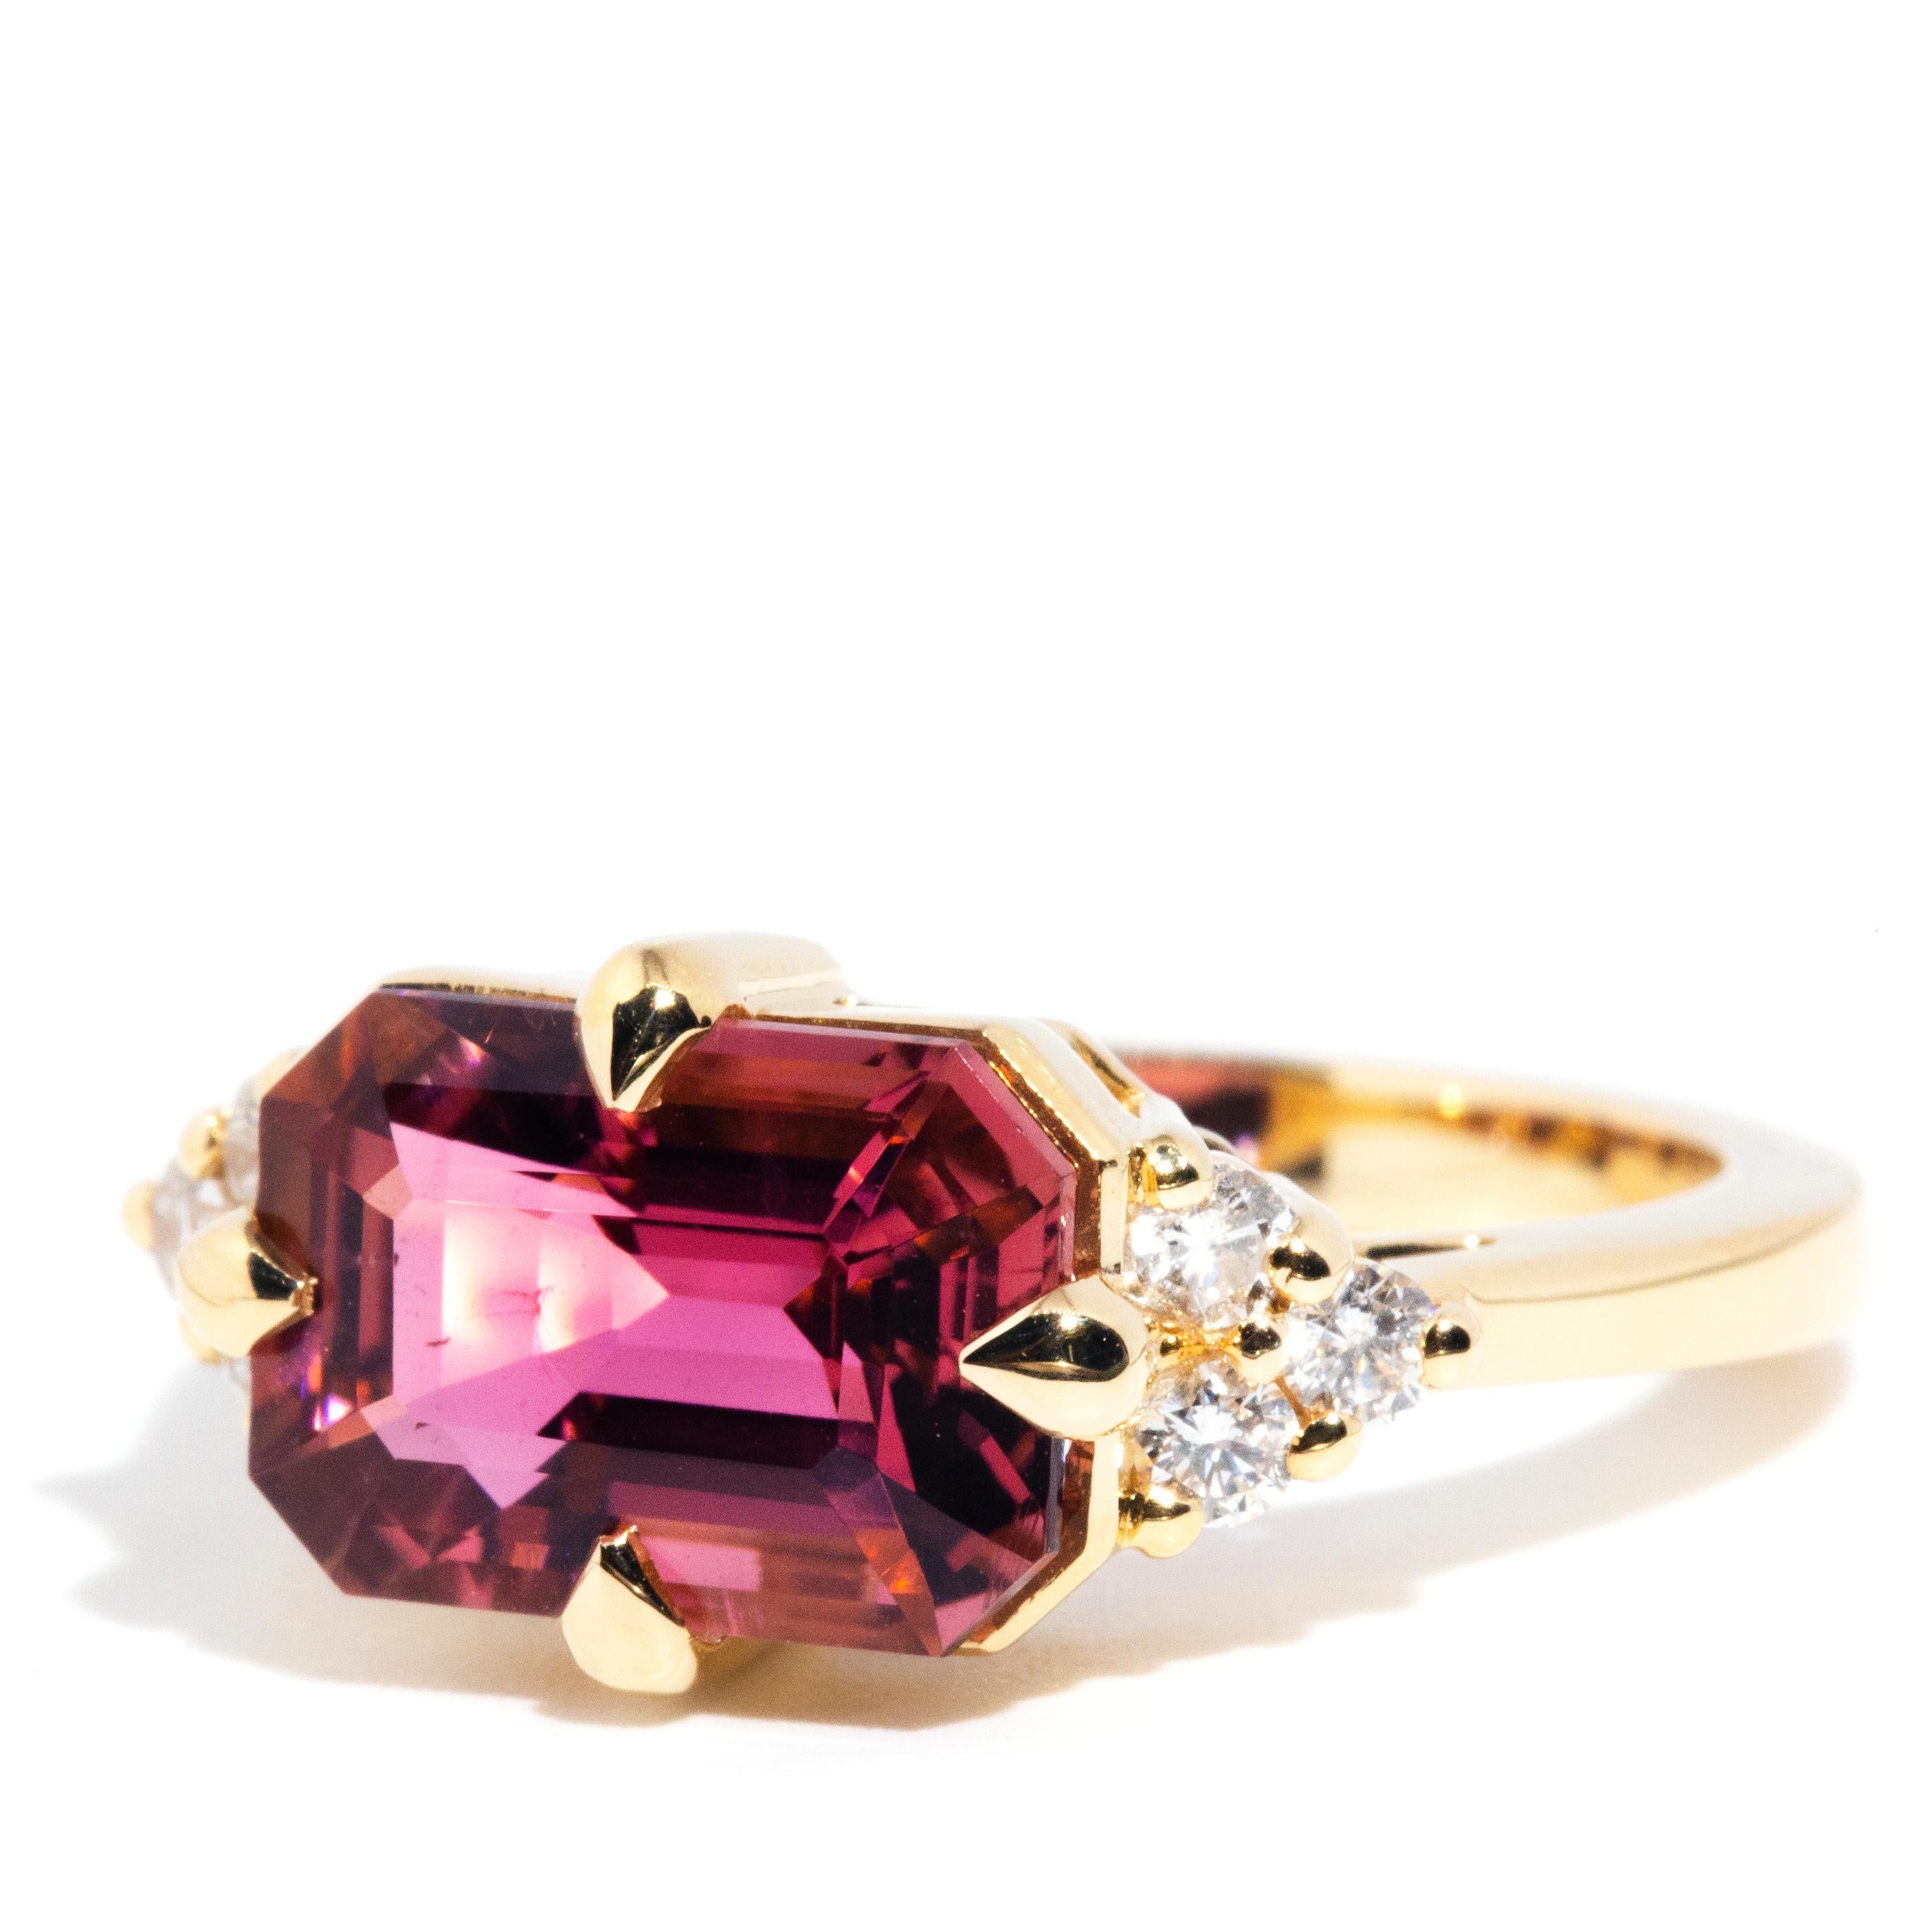 Forged in 18 carat yellow gold, this uniquely designed contemporary ring is absolutely gorgeous holding a captivating 4.09 carat bright reddish-pink emerald cut tourmaline flanked by a total of 0.30 carats of round brilliant cut diamonds arranged in